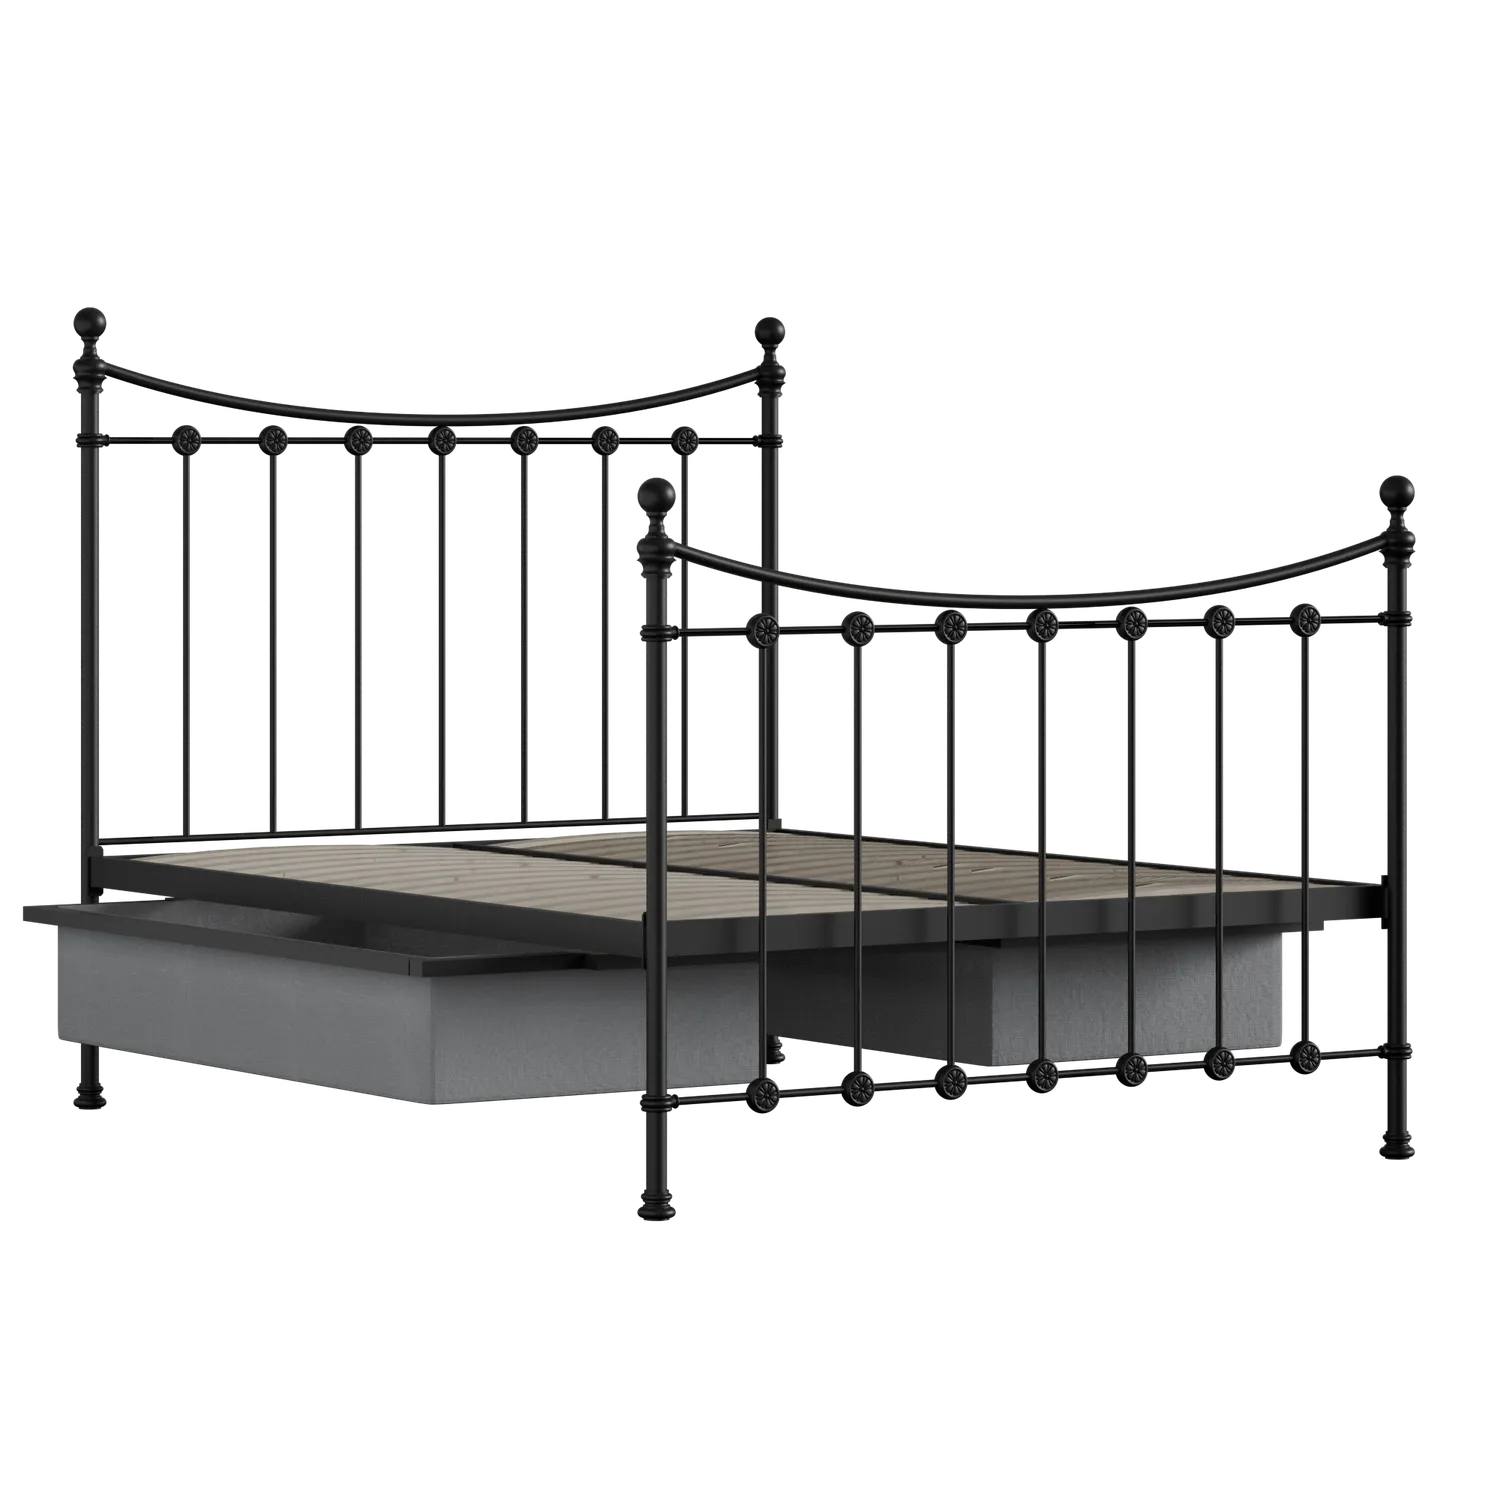 Carrick Solo iron/metal bed in black with drawers